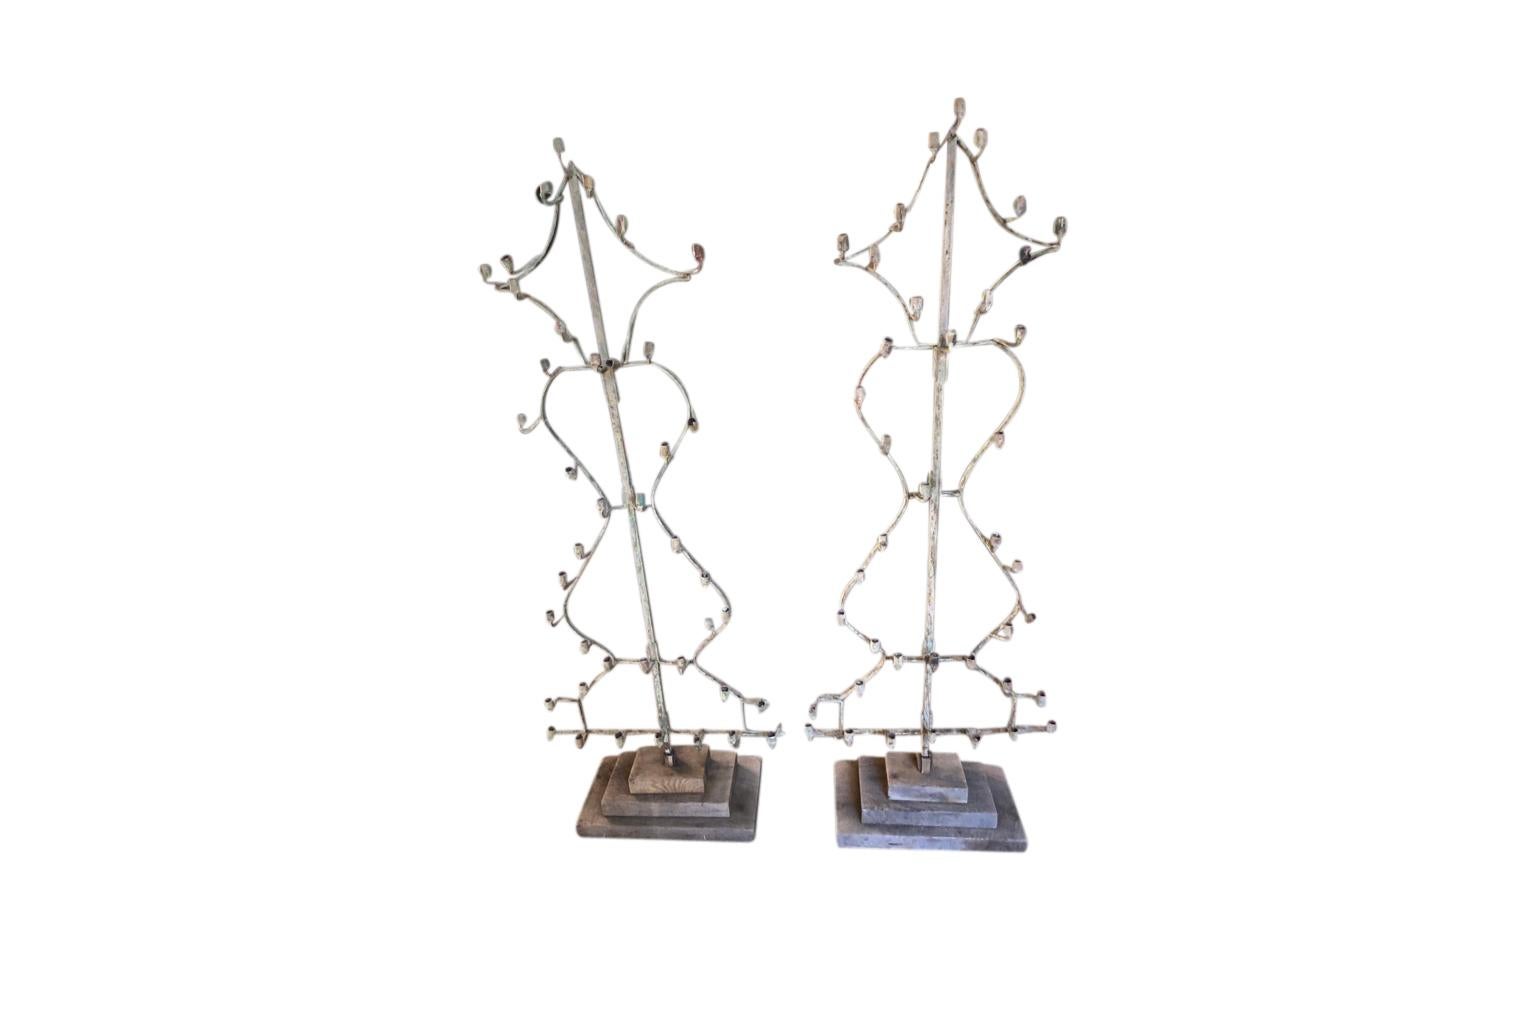 A stunning and very unusual pair of later 18th century Candelabra - Appliques - Sconces crafted from hand forged iron with riveting. The candelabra now stand in their removable wooden bases. These fabulous light fixtures are perfect for candles or